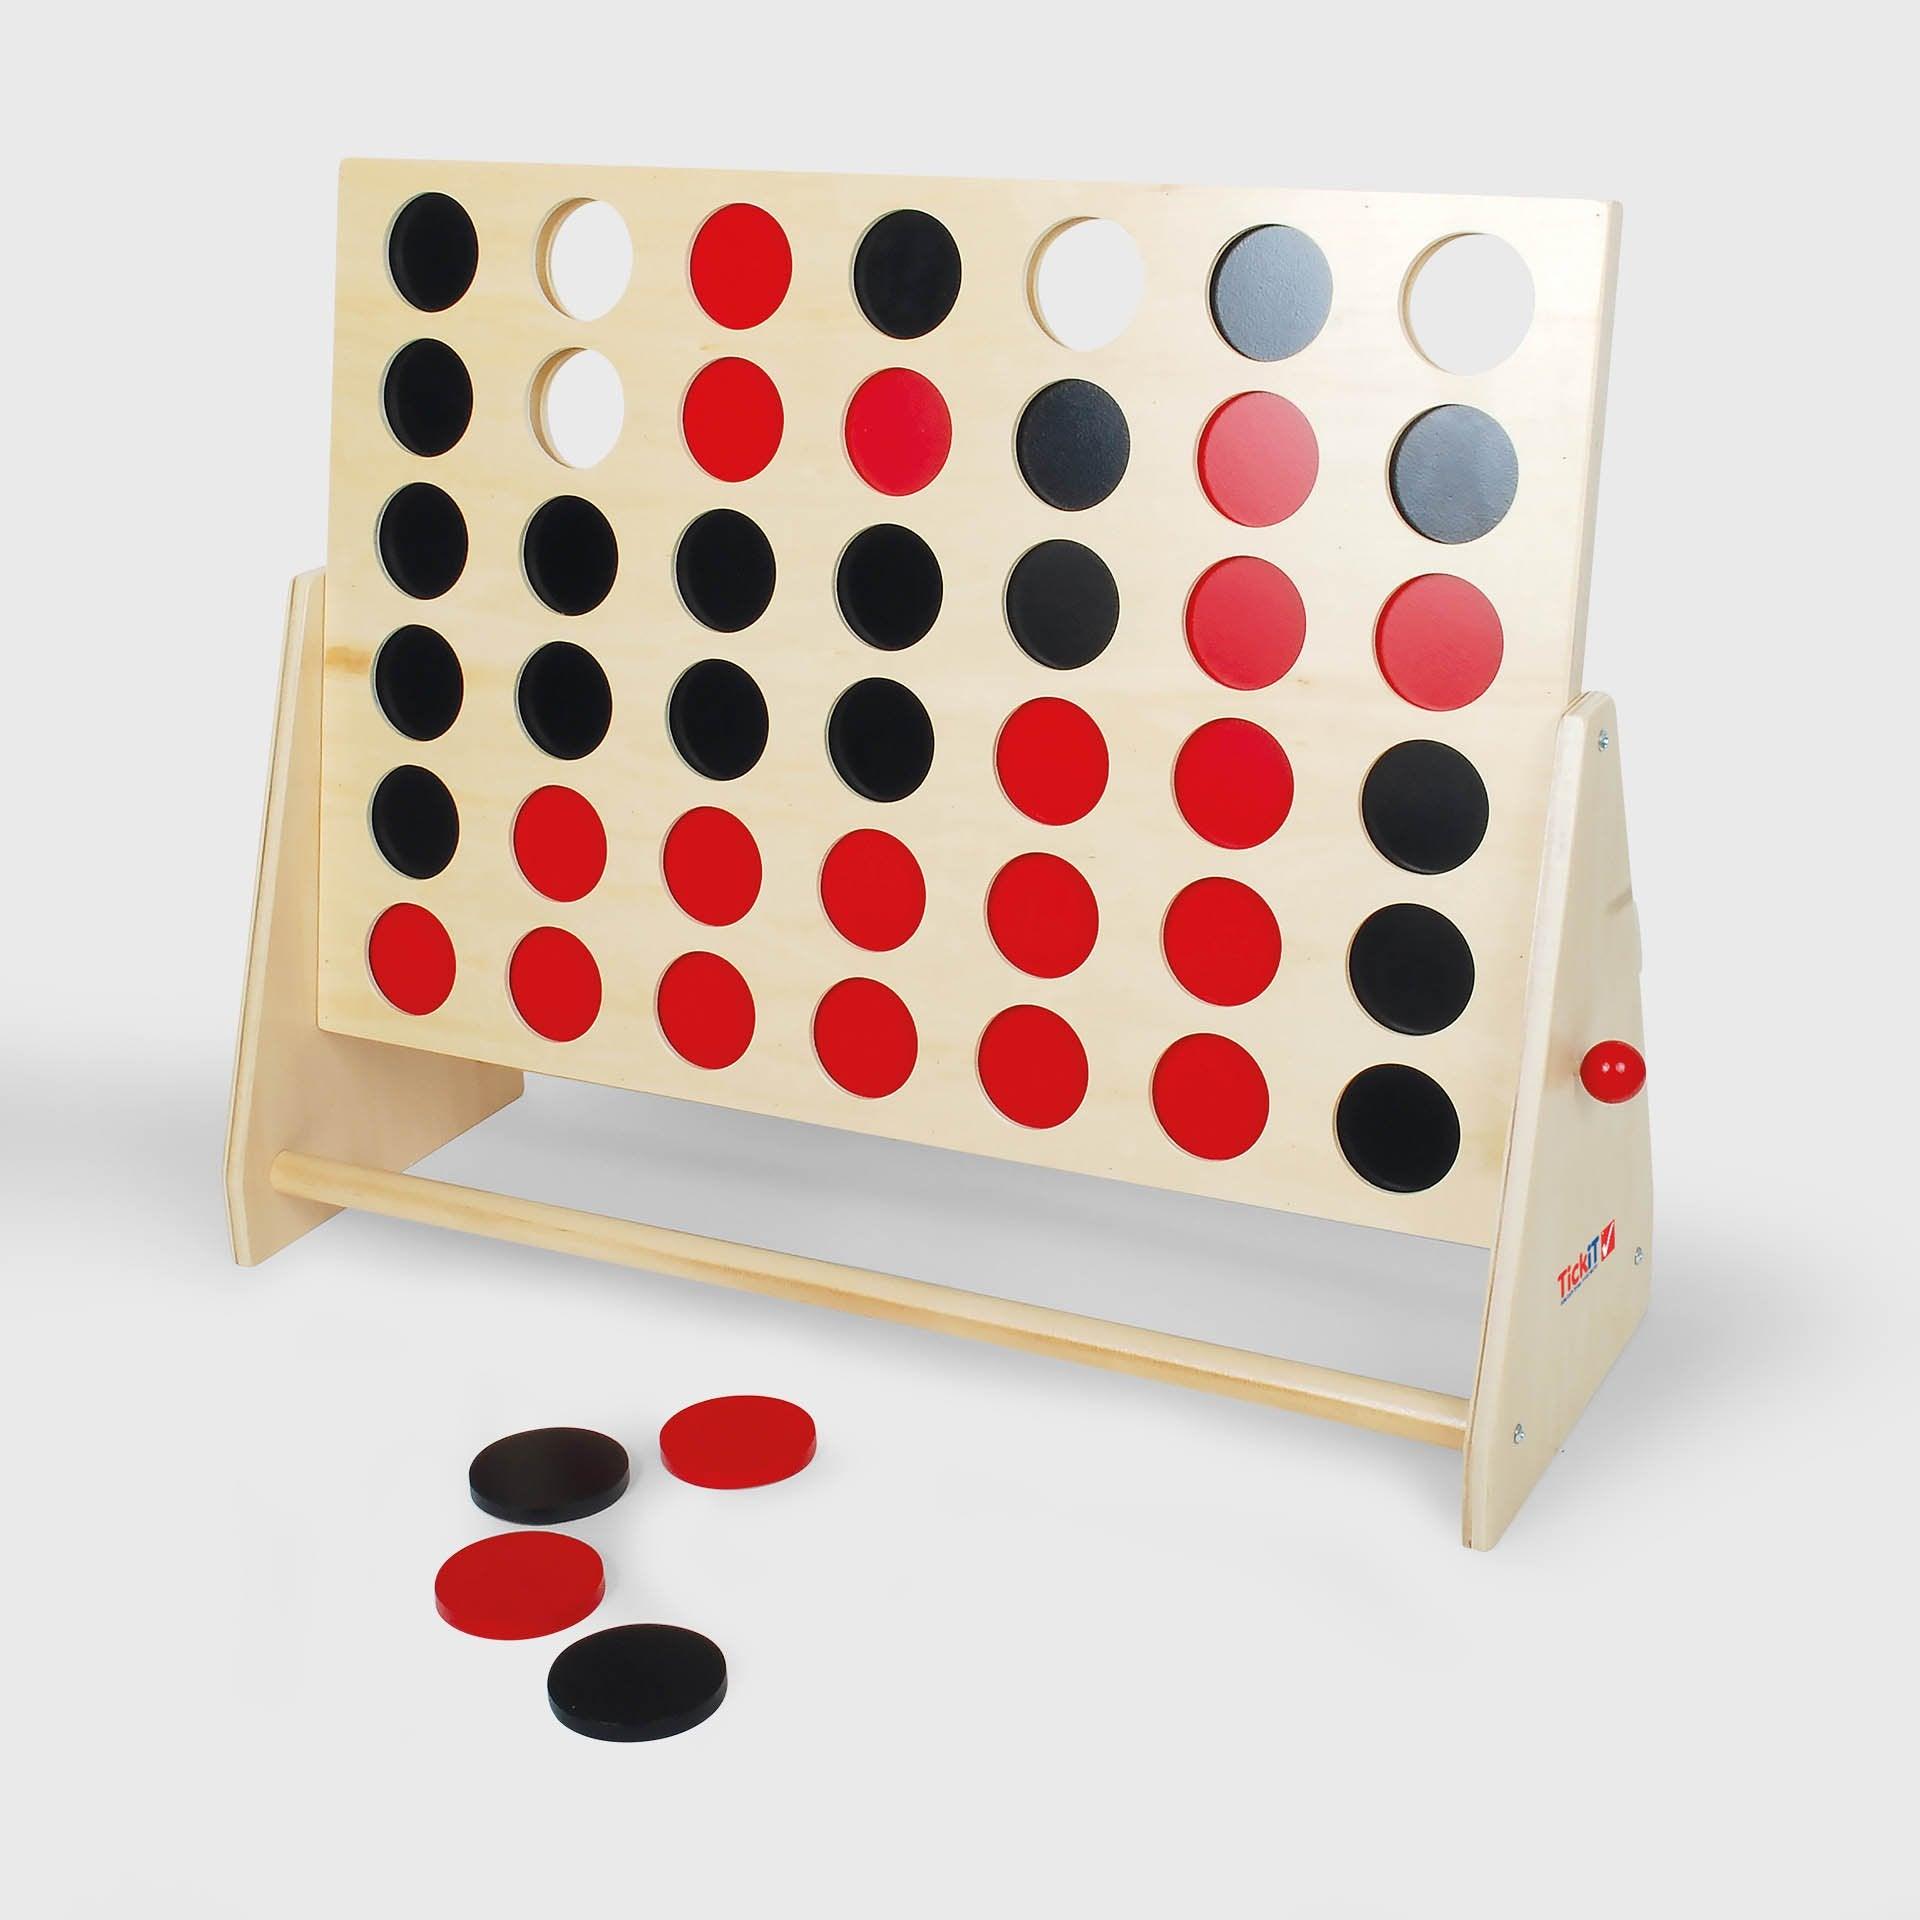 Giant Wooden 4 In A Row, A large version of the traditional wooden 4 in a row game with a sturdy frame and smooth finished wooden black and red counters. The Wooden 4 In A Row is made of rugged plywood construction is of excellent quality and is ideal for outdoor play. Use in the conventional way – racing your partner to make a row of four with your counters, for practising simple counting skills or for pattern making – a great way to strengthen motor skills and logic, and to improve concentration. Simply r